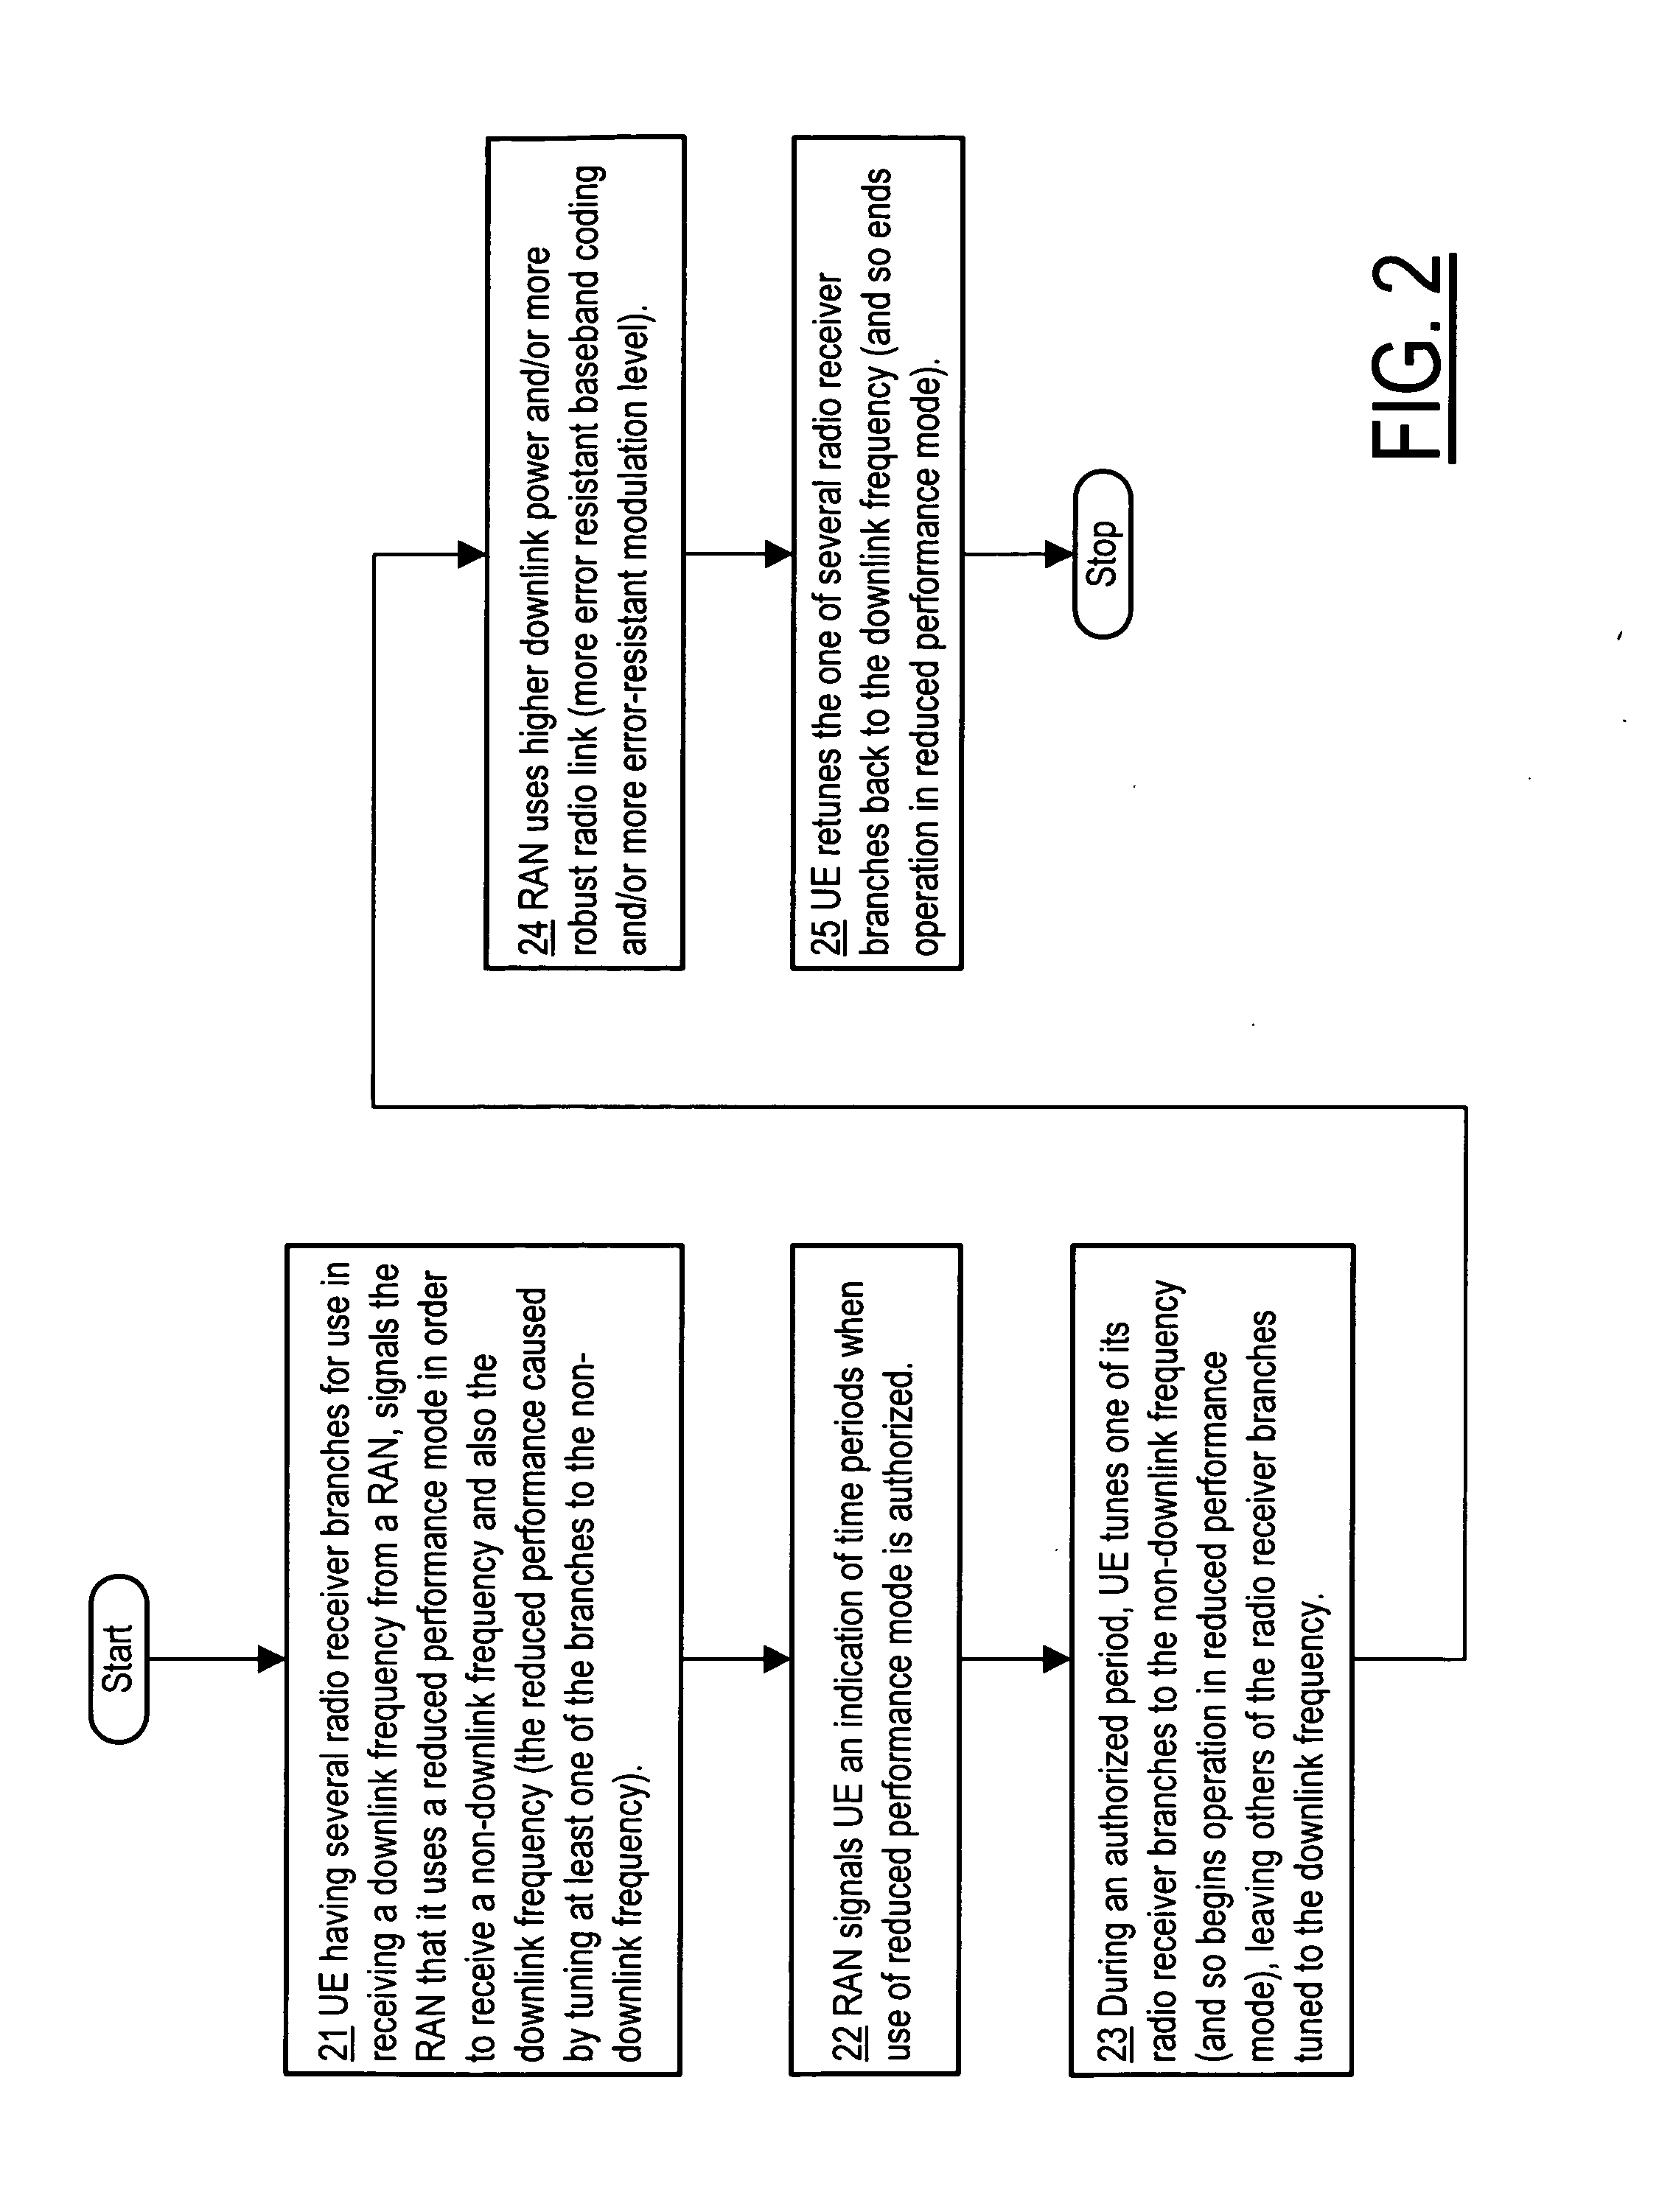 Reduced performance mode of operation for use as needed by a wireless communication terminal